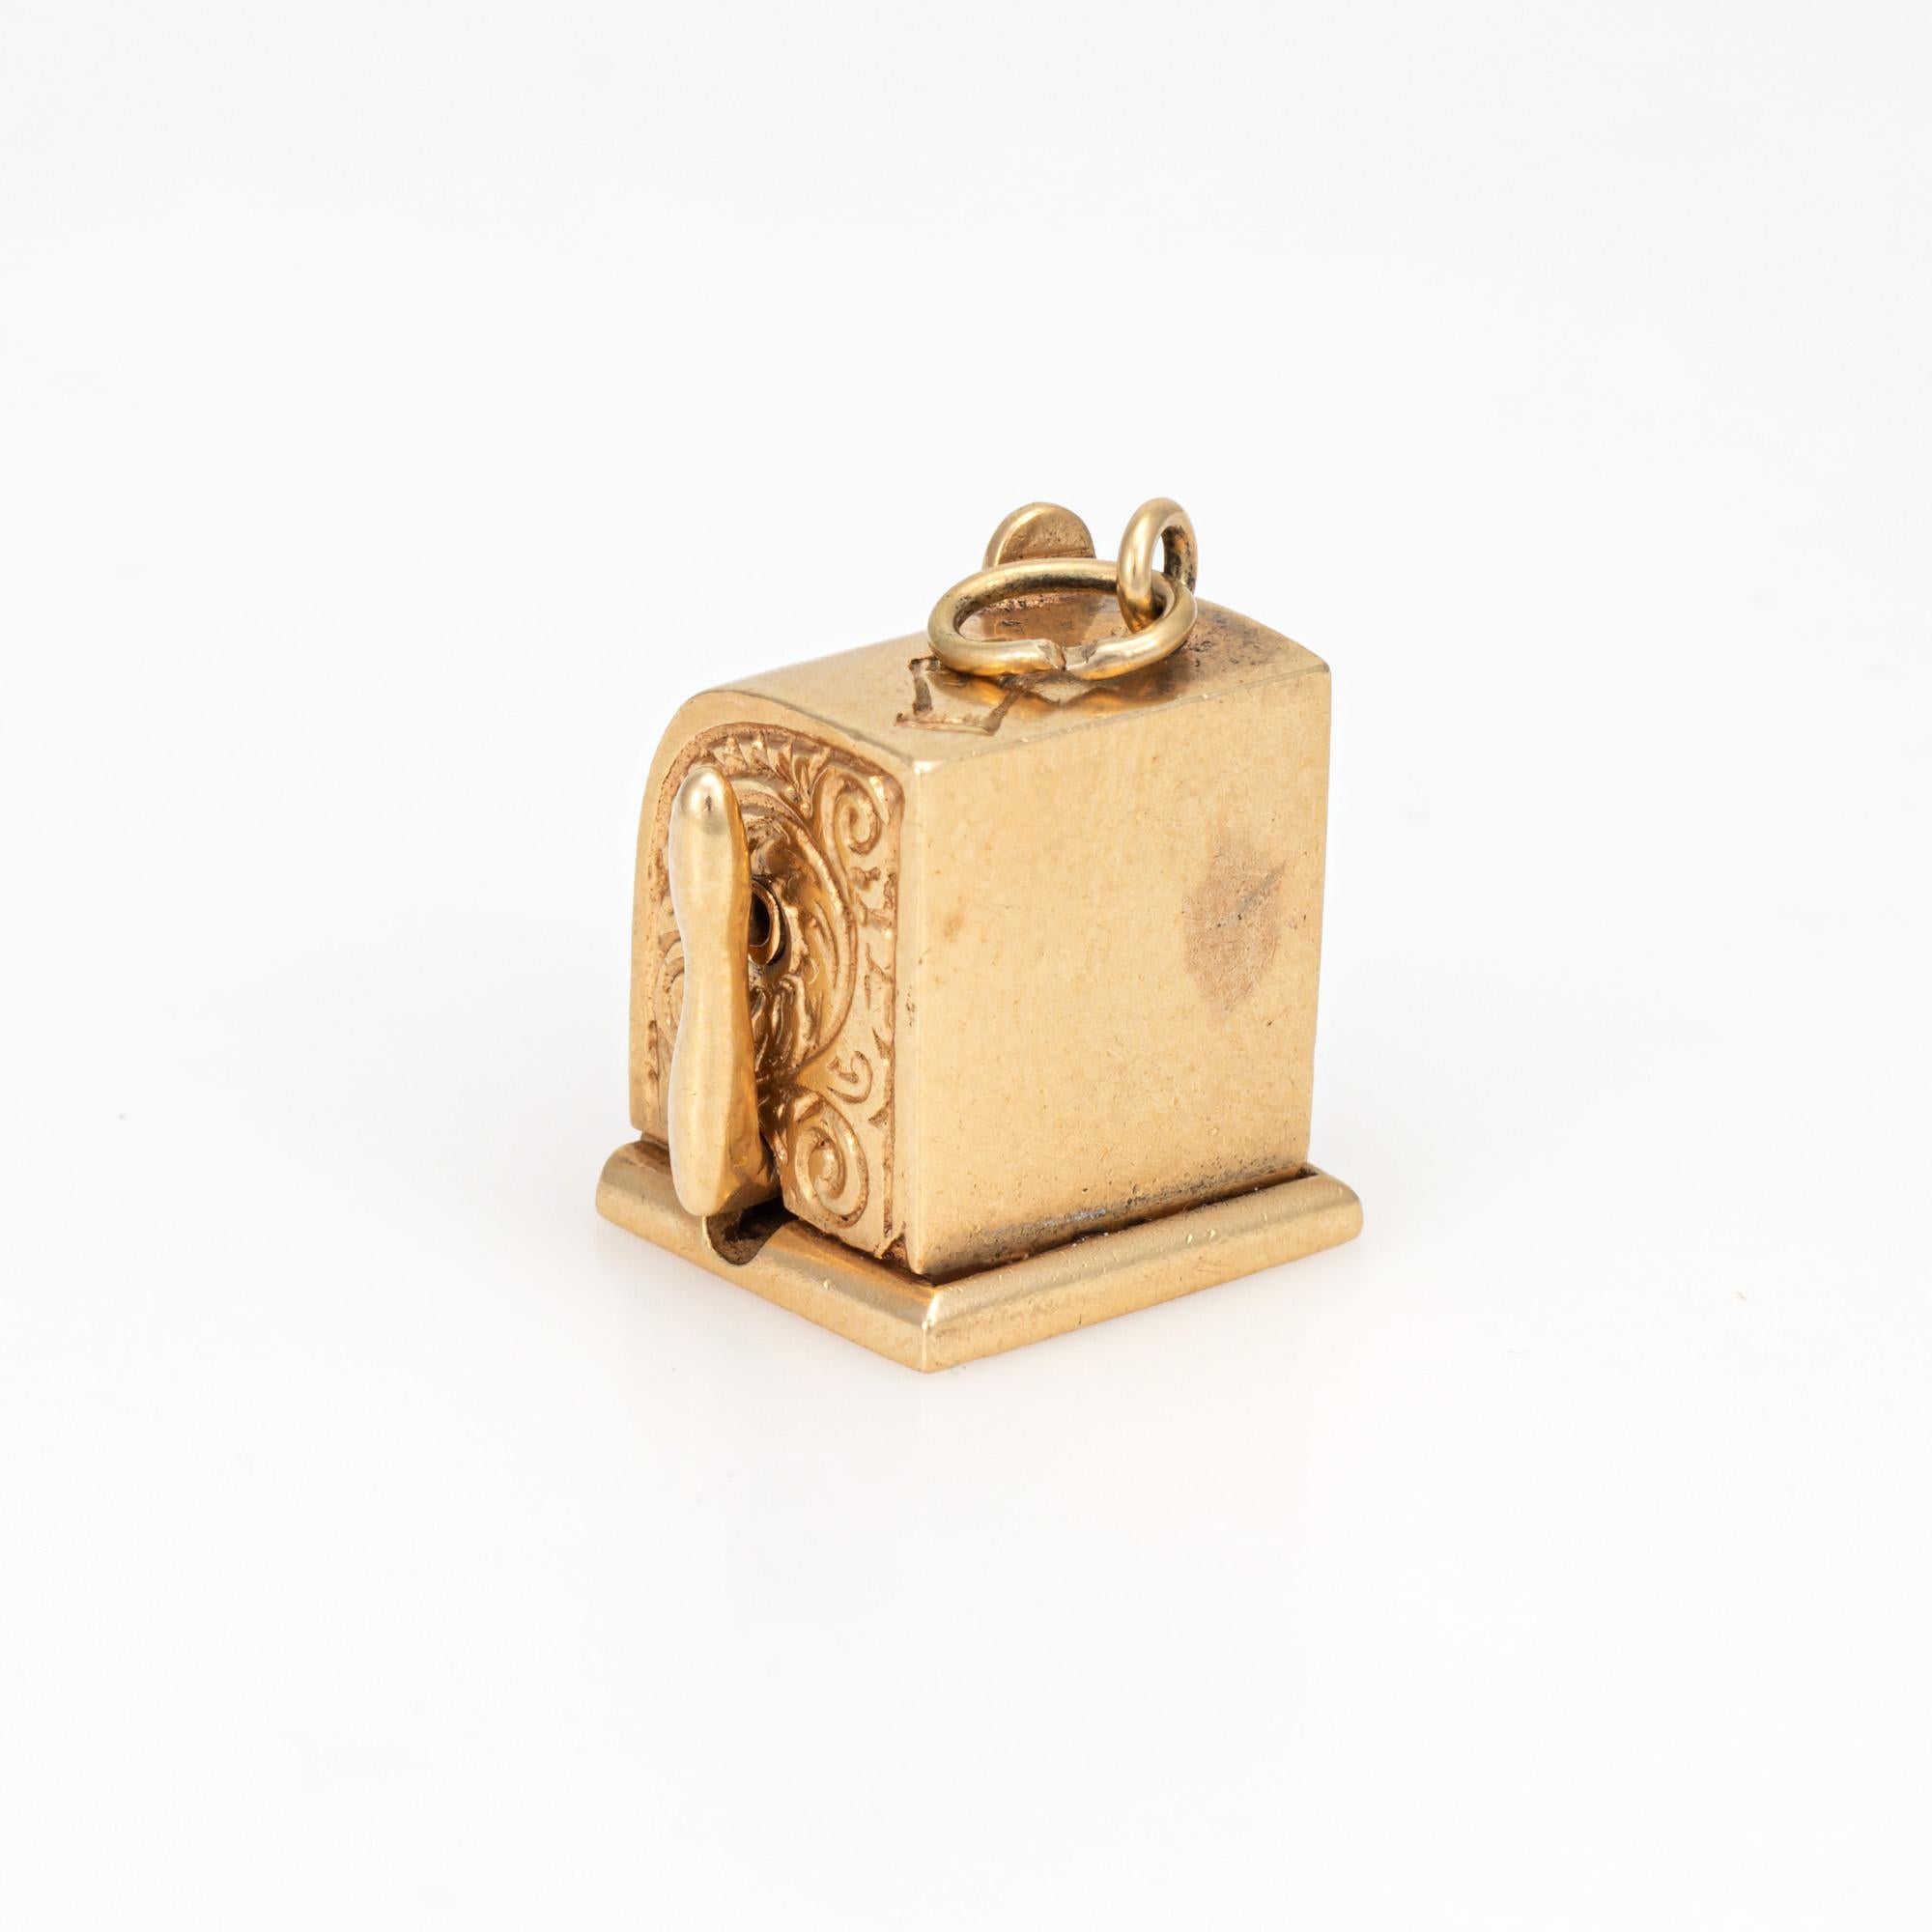 Finely detailed vintage slot machine charm crafted in 14k yellow gold (circa 1940s to 1950s).  

The nicely detailed charm features a slot machine with viewing windows highlighting depictions of fruit (cherries, lemons, oranges and pears).